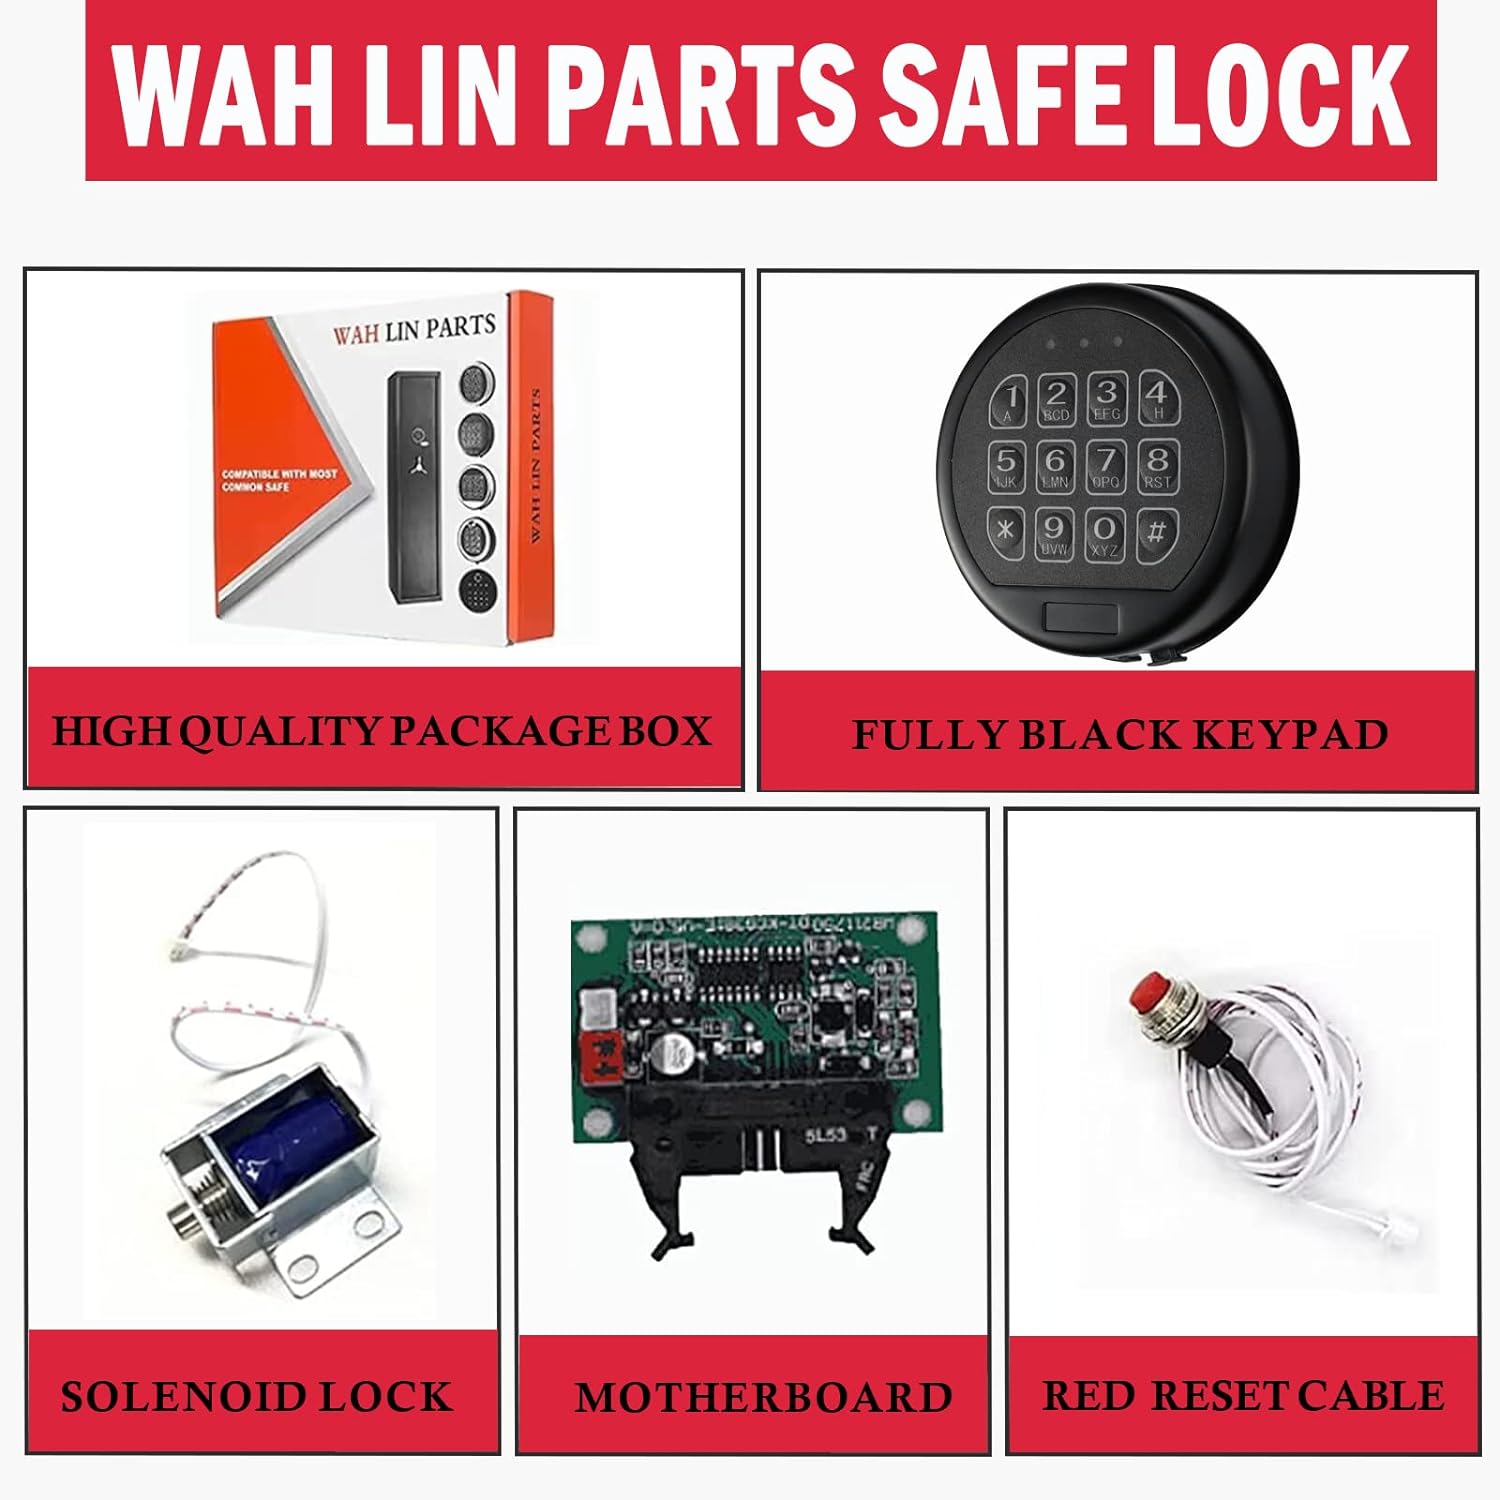 Wah Lin Parts Gun Safe Lock Replacement Black Keypad with Solenoid Lock,Safe Electronic Lock for Most Common Safes